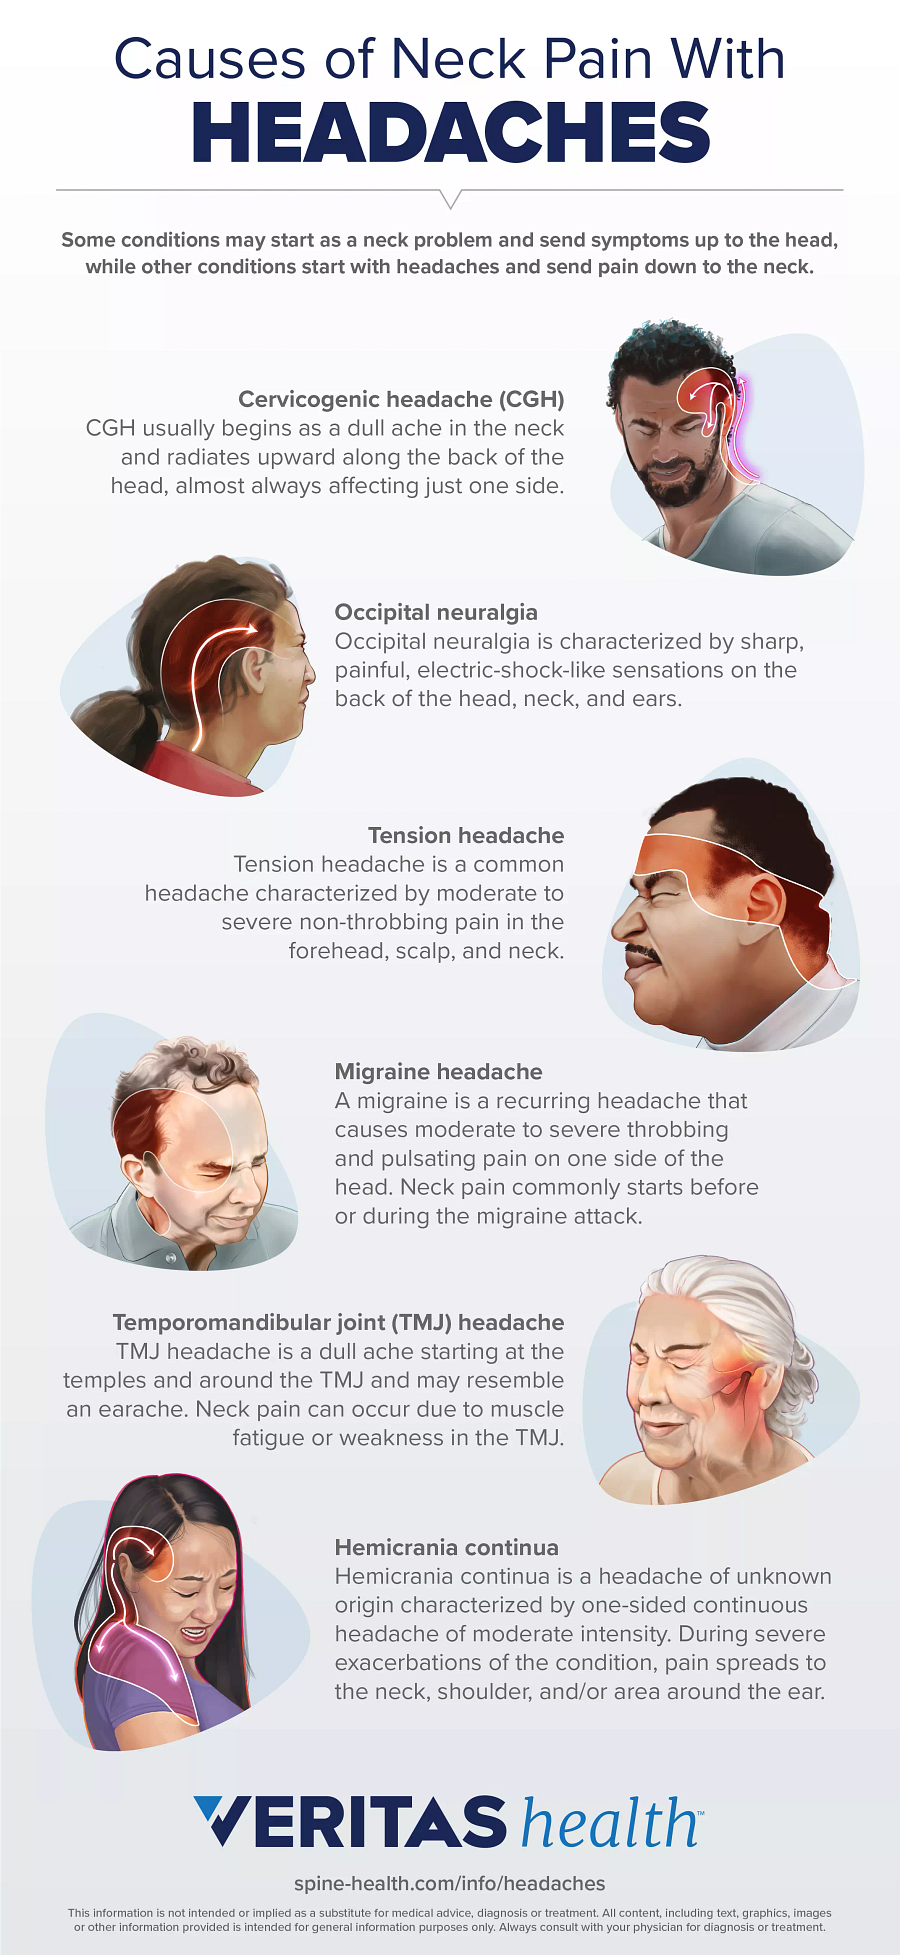 Infographic of Neck Pain and Headaches Go Together